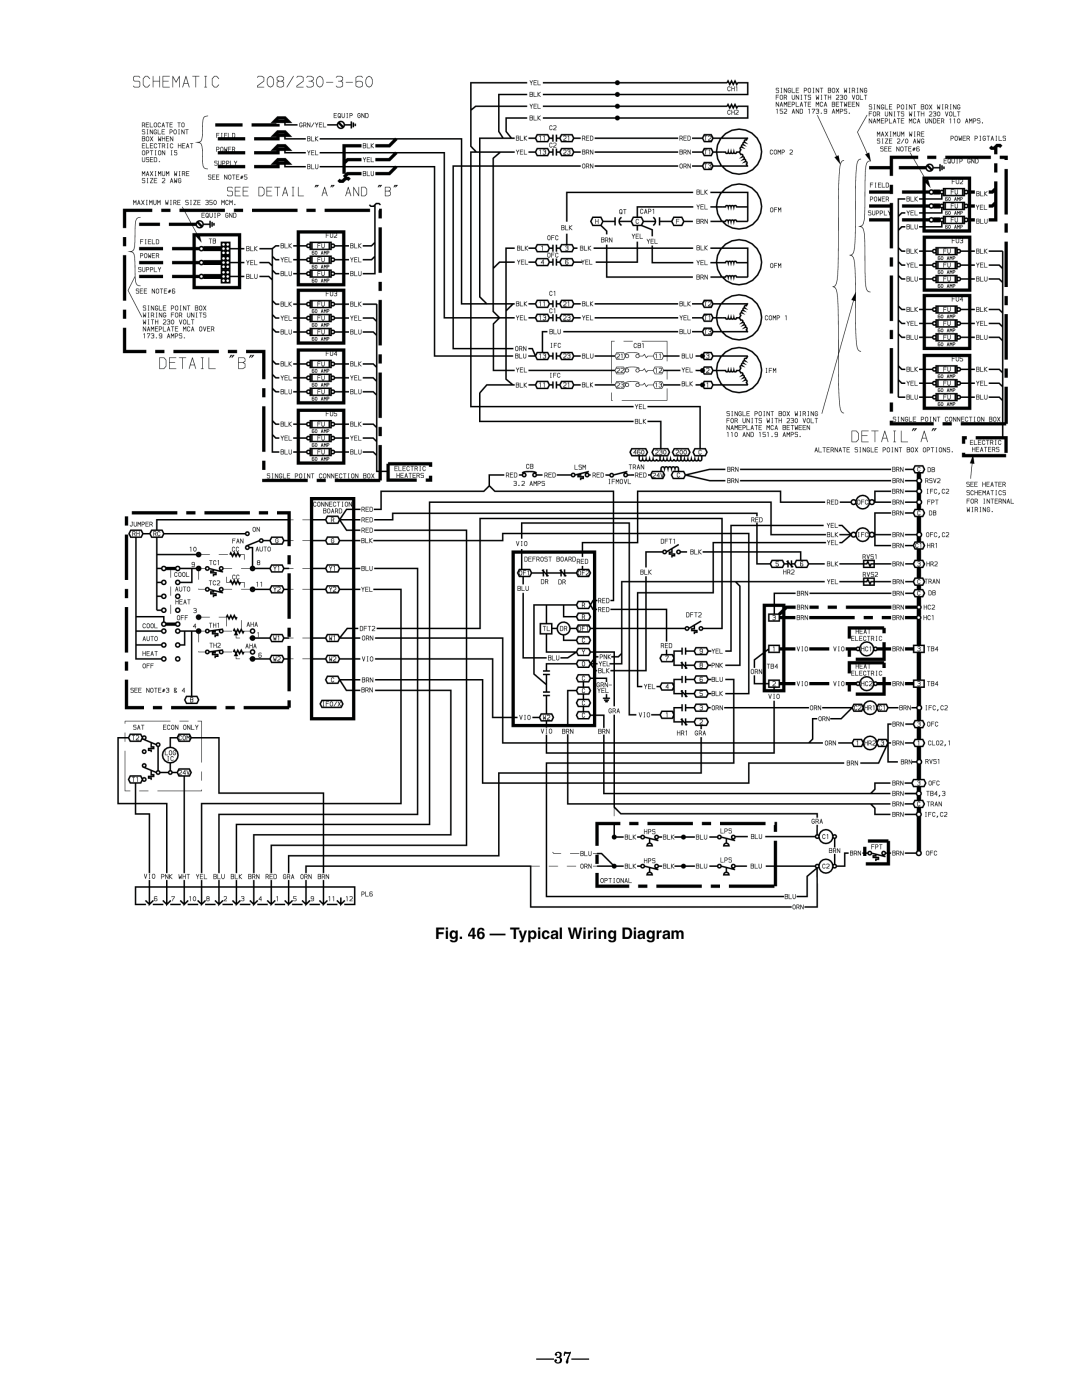 Bryant 548D installation instructions Typical Wiring Diagram 